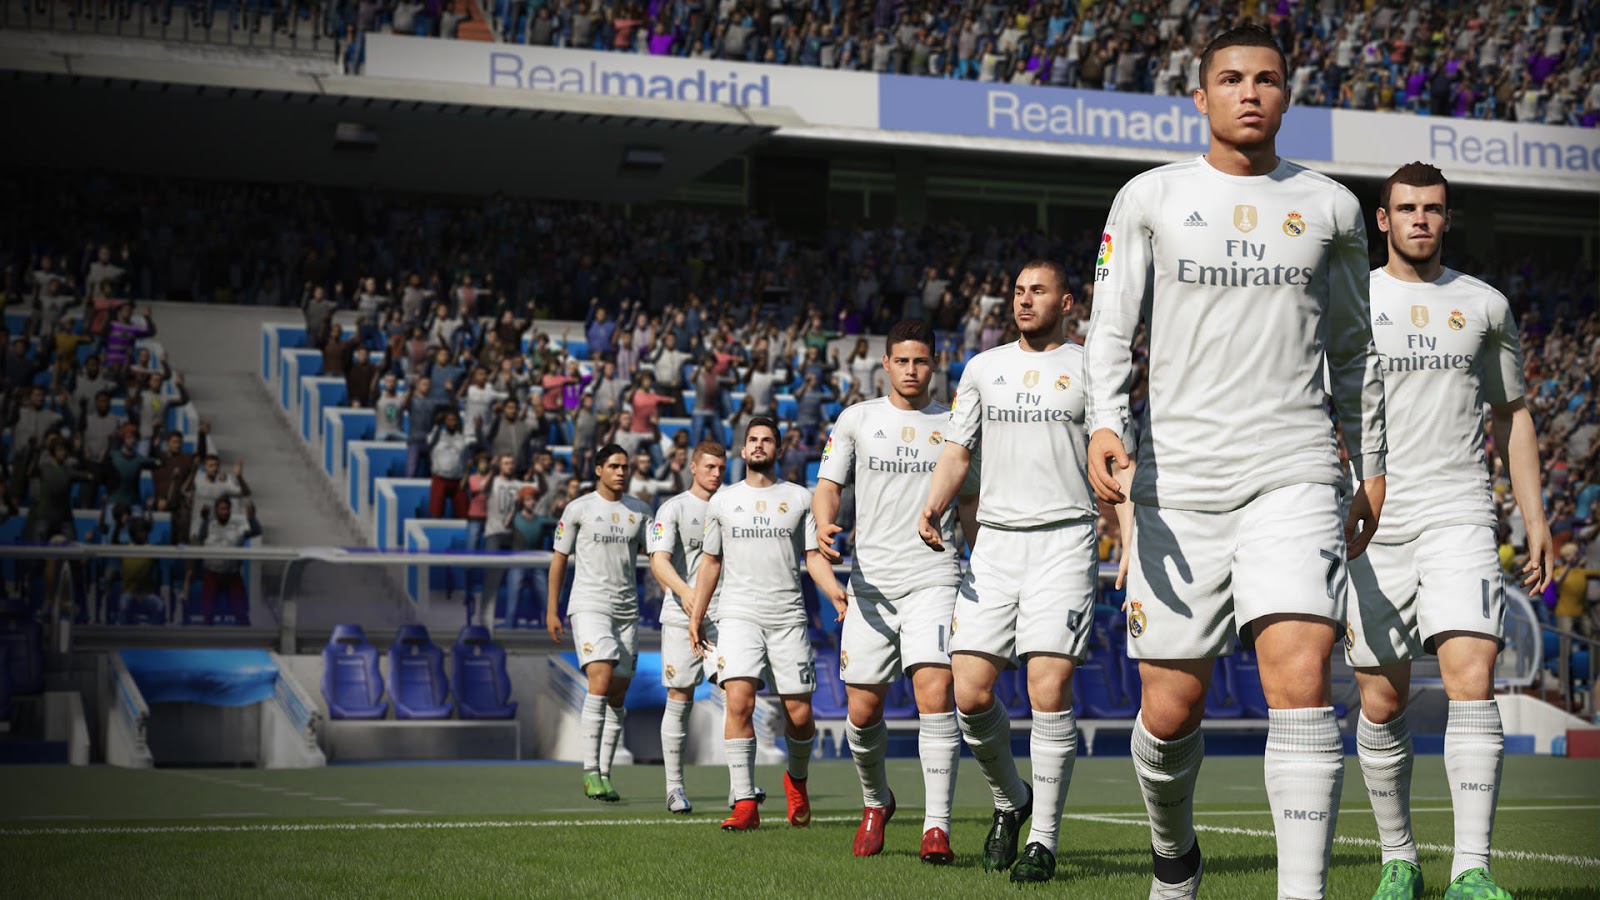 FIFA 17 Download PC Game Full Version | Full Free PC Game Download